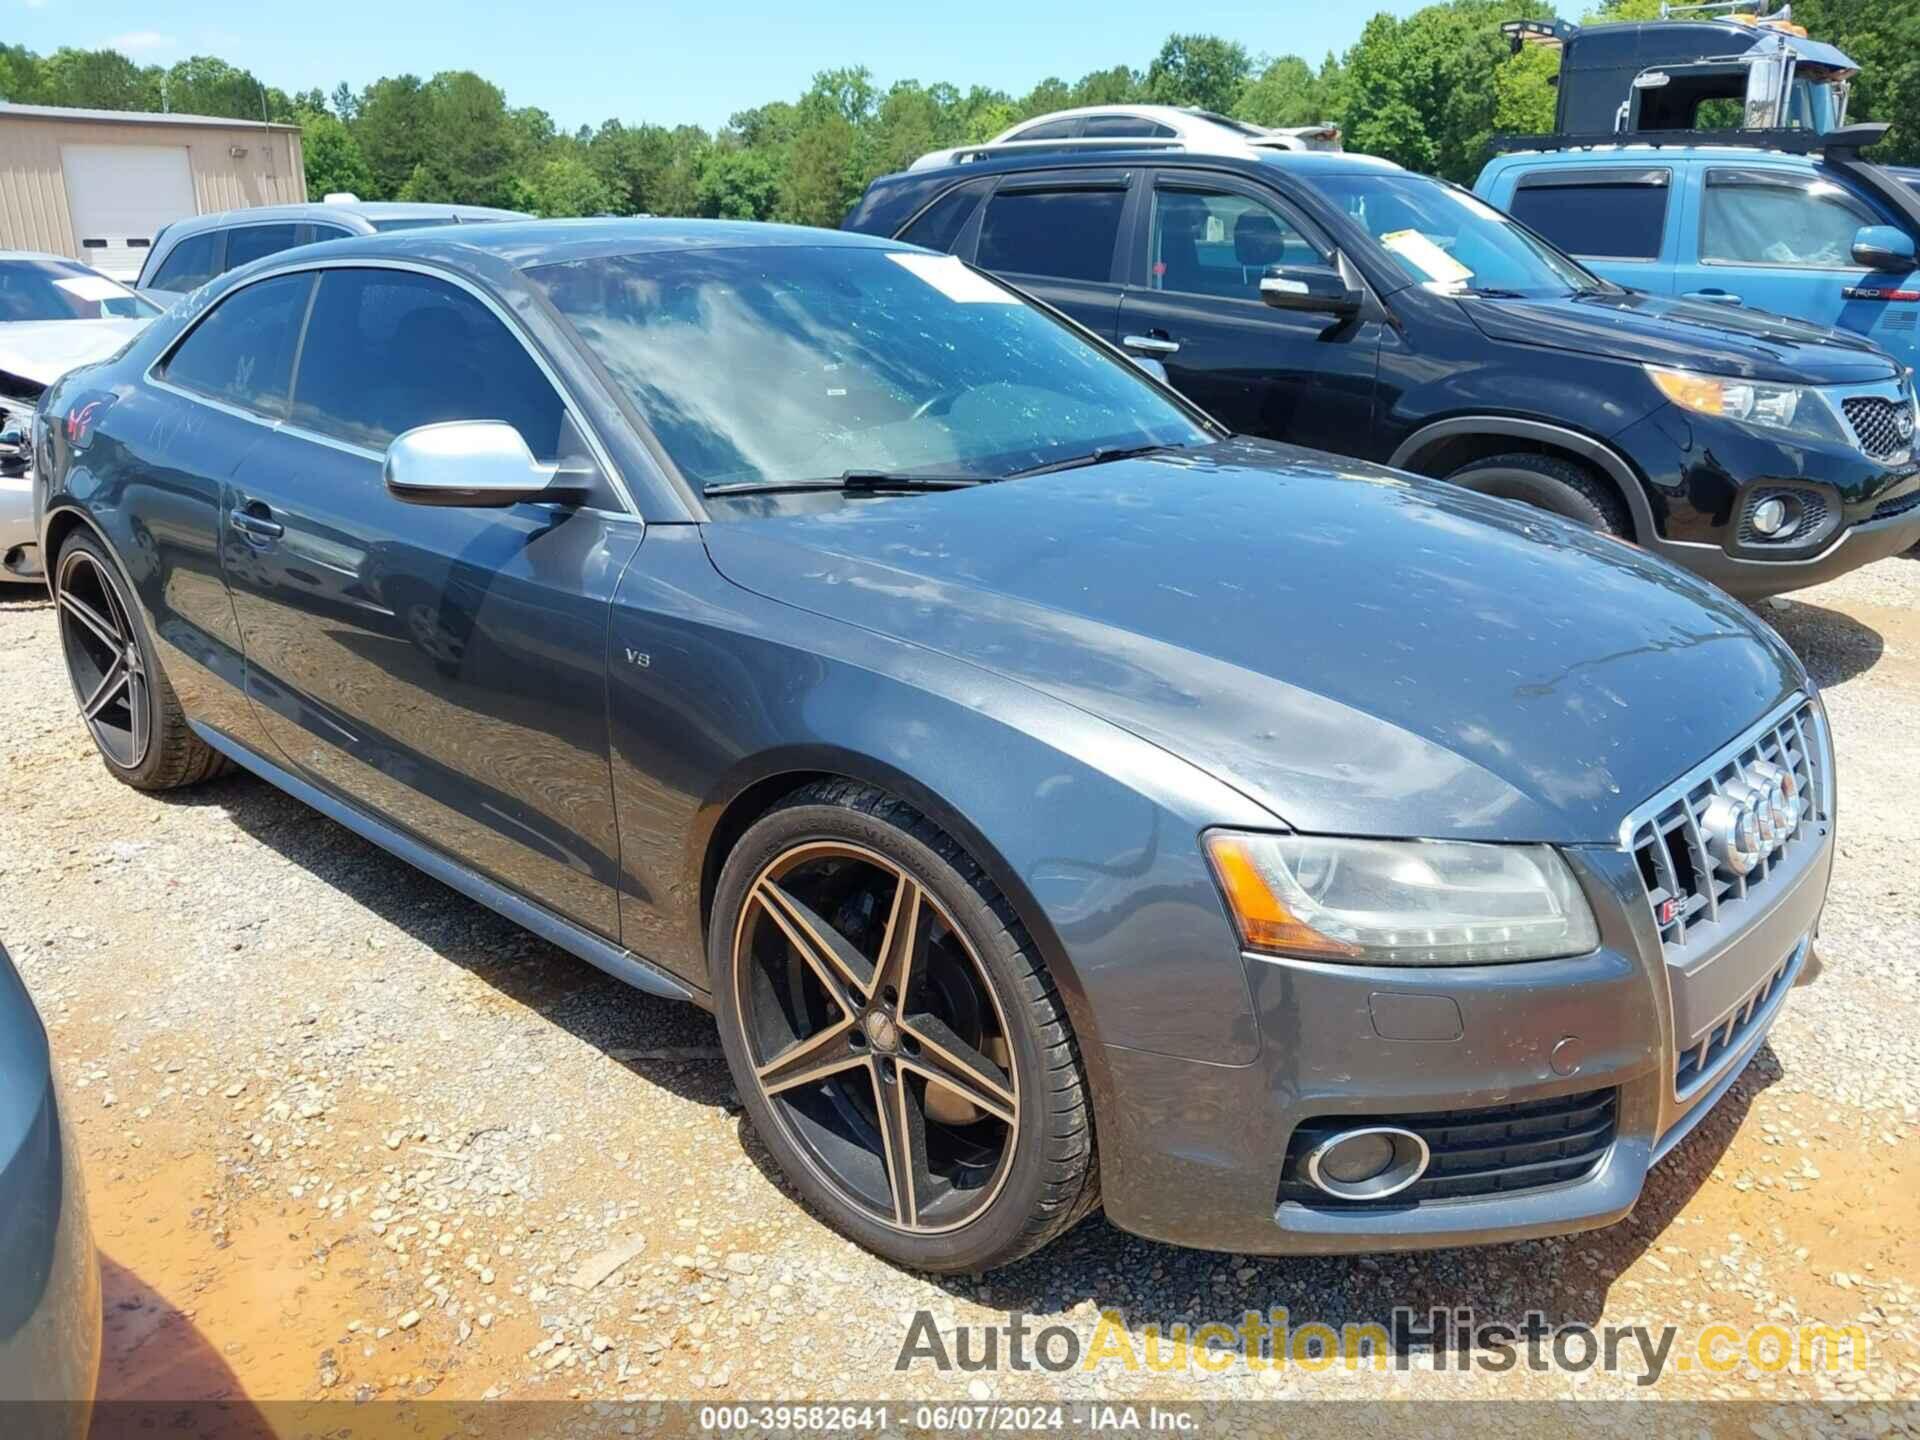 AUDI S5 4.2 SPECIAL EDITION, WAUVVAFR3CA018930